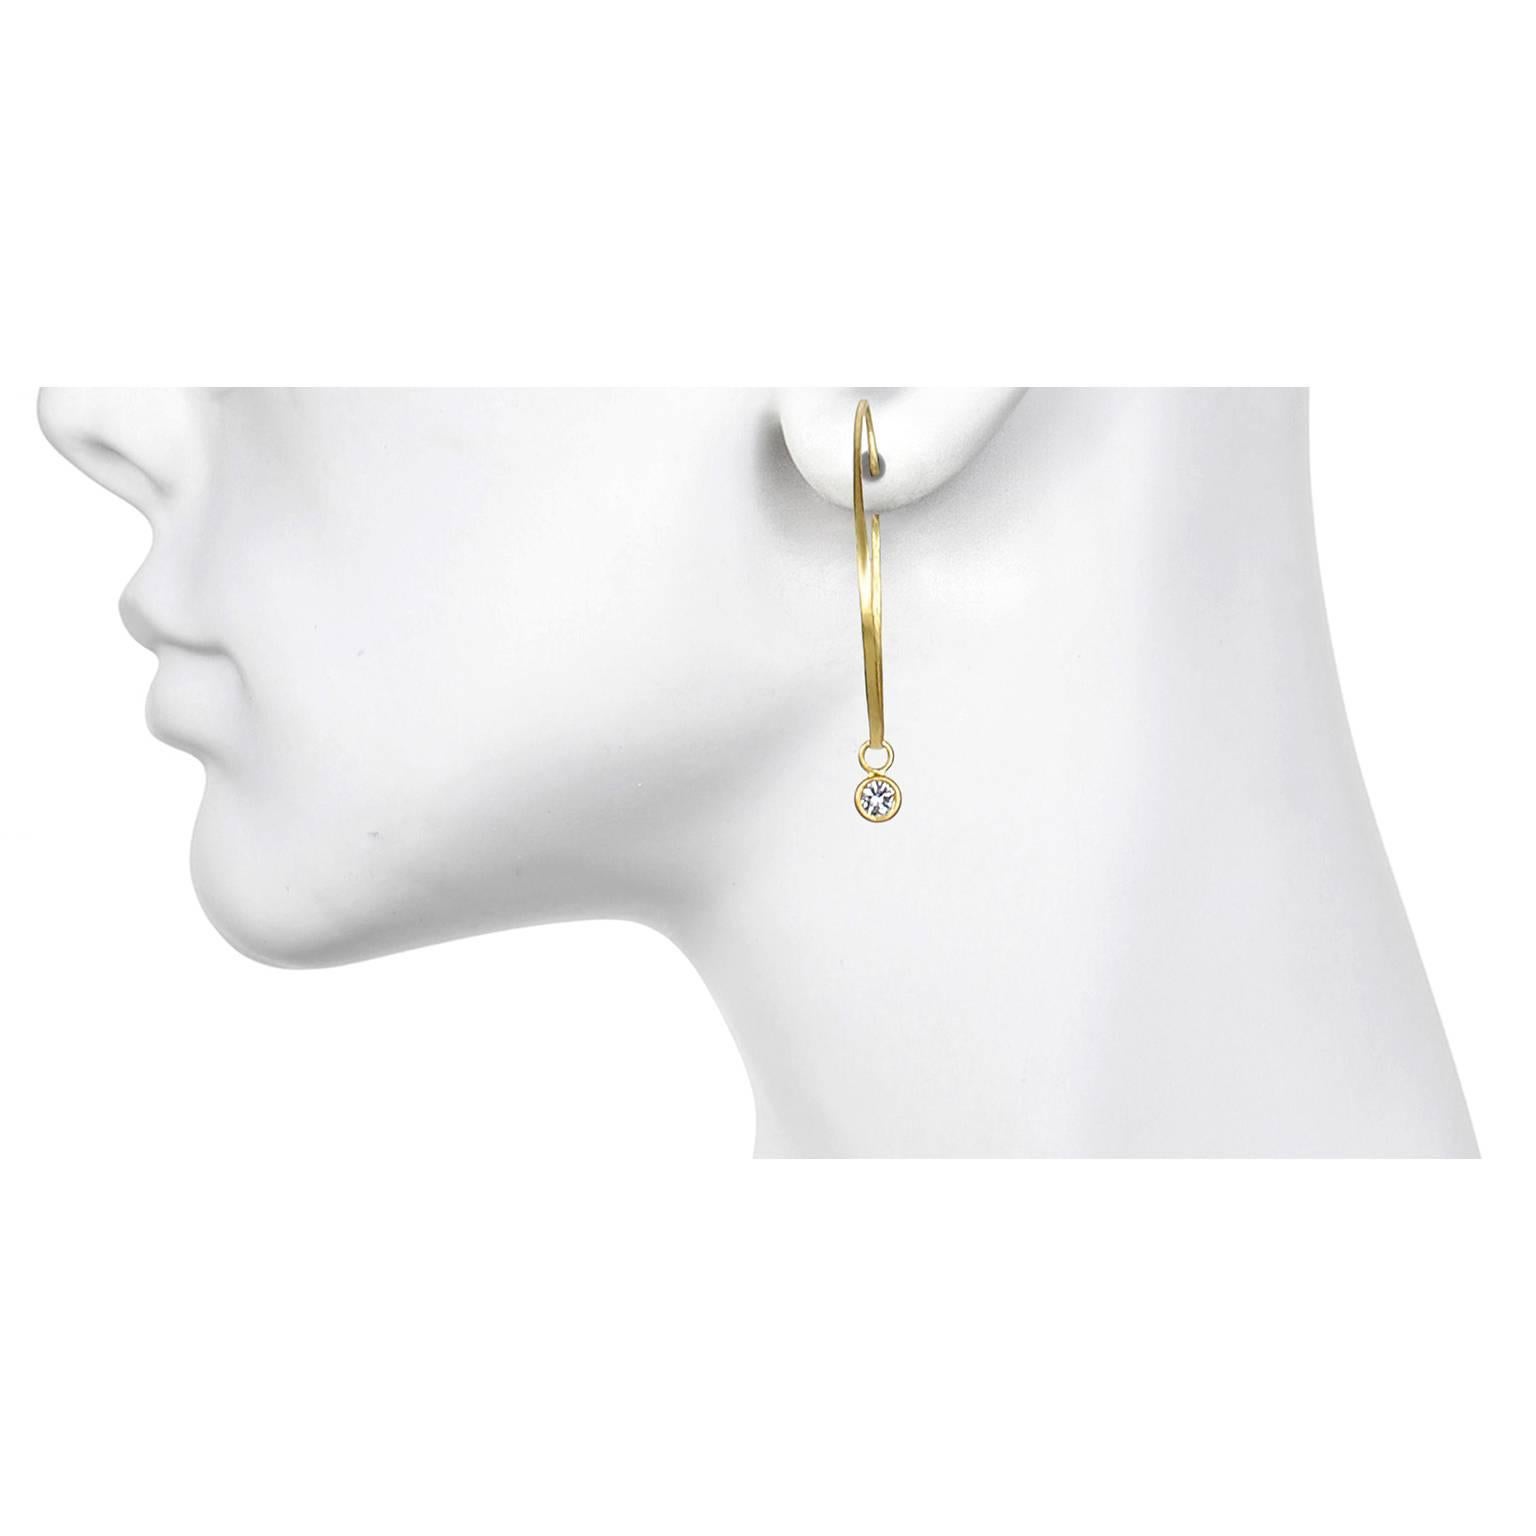 Diamonds and Gold - two classic items combined to create the perfect pair of earrings to wear day in and day out.  On their own, these Faye Kim 18 Karat Gold hoops are easy to wear and go with just about everything. The added diamond drops will